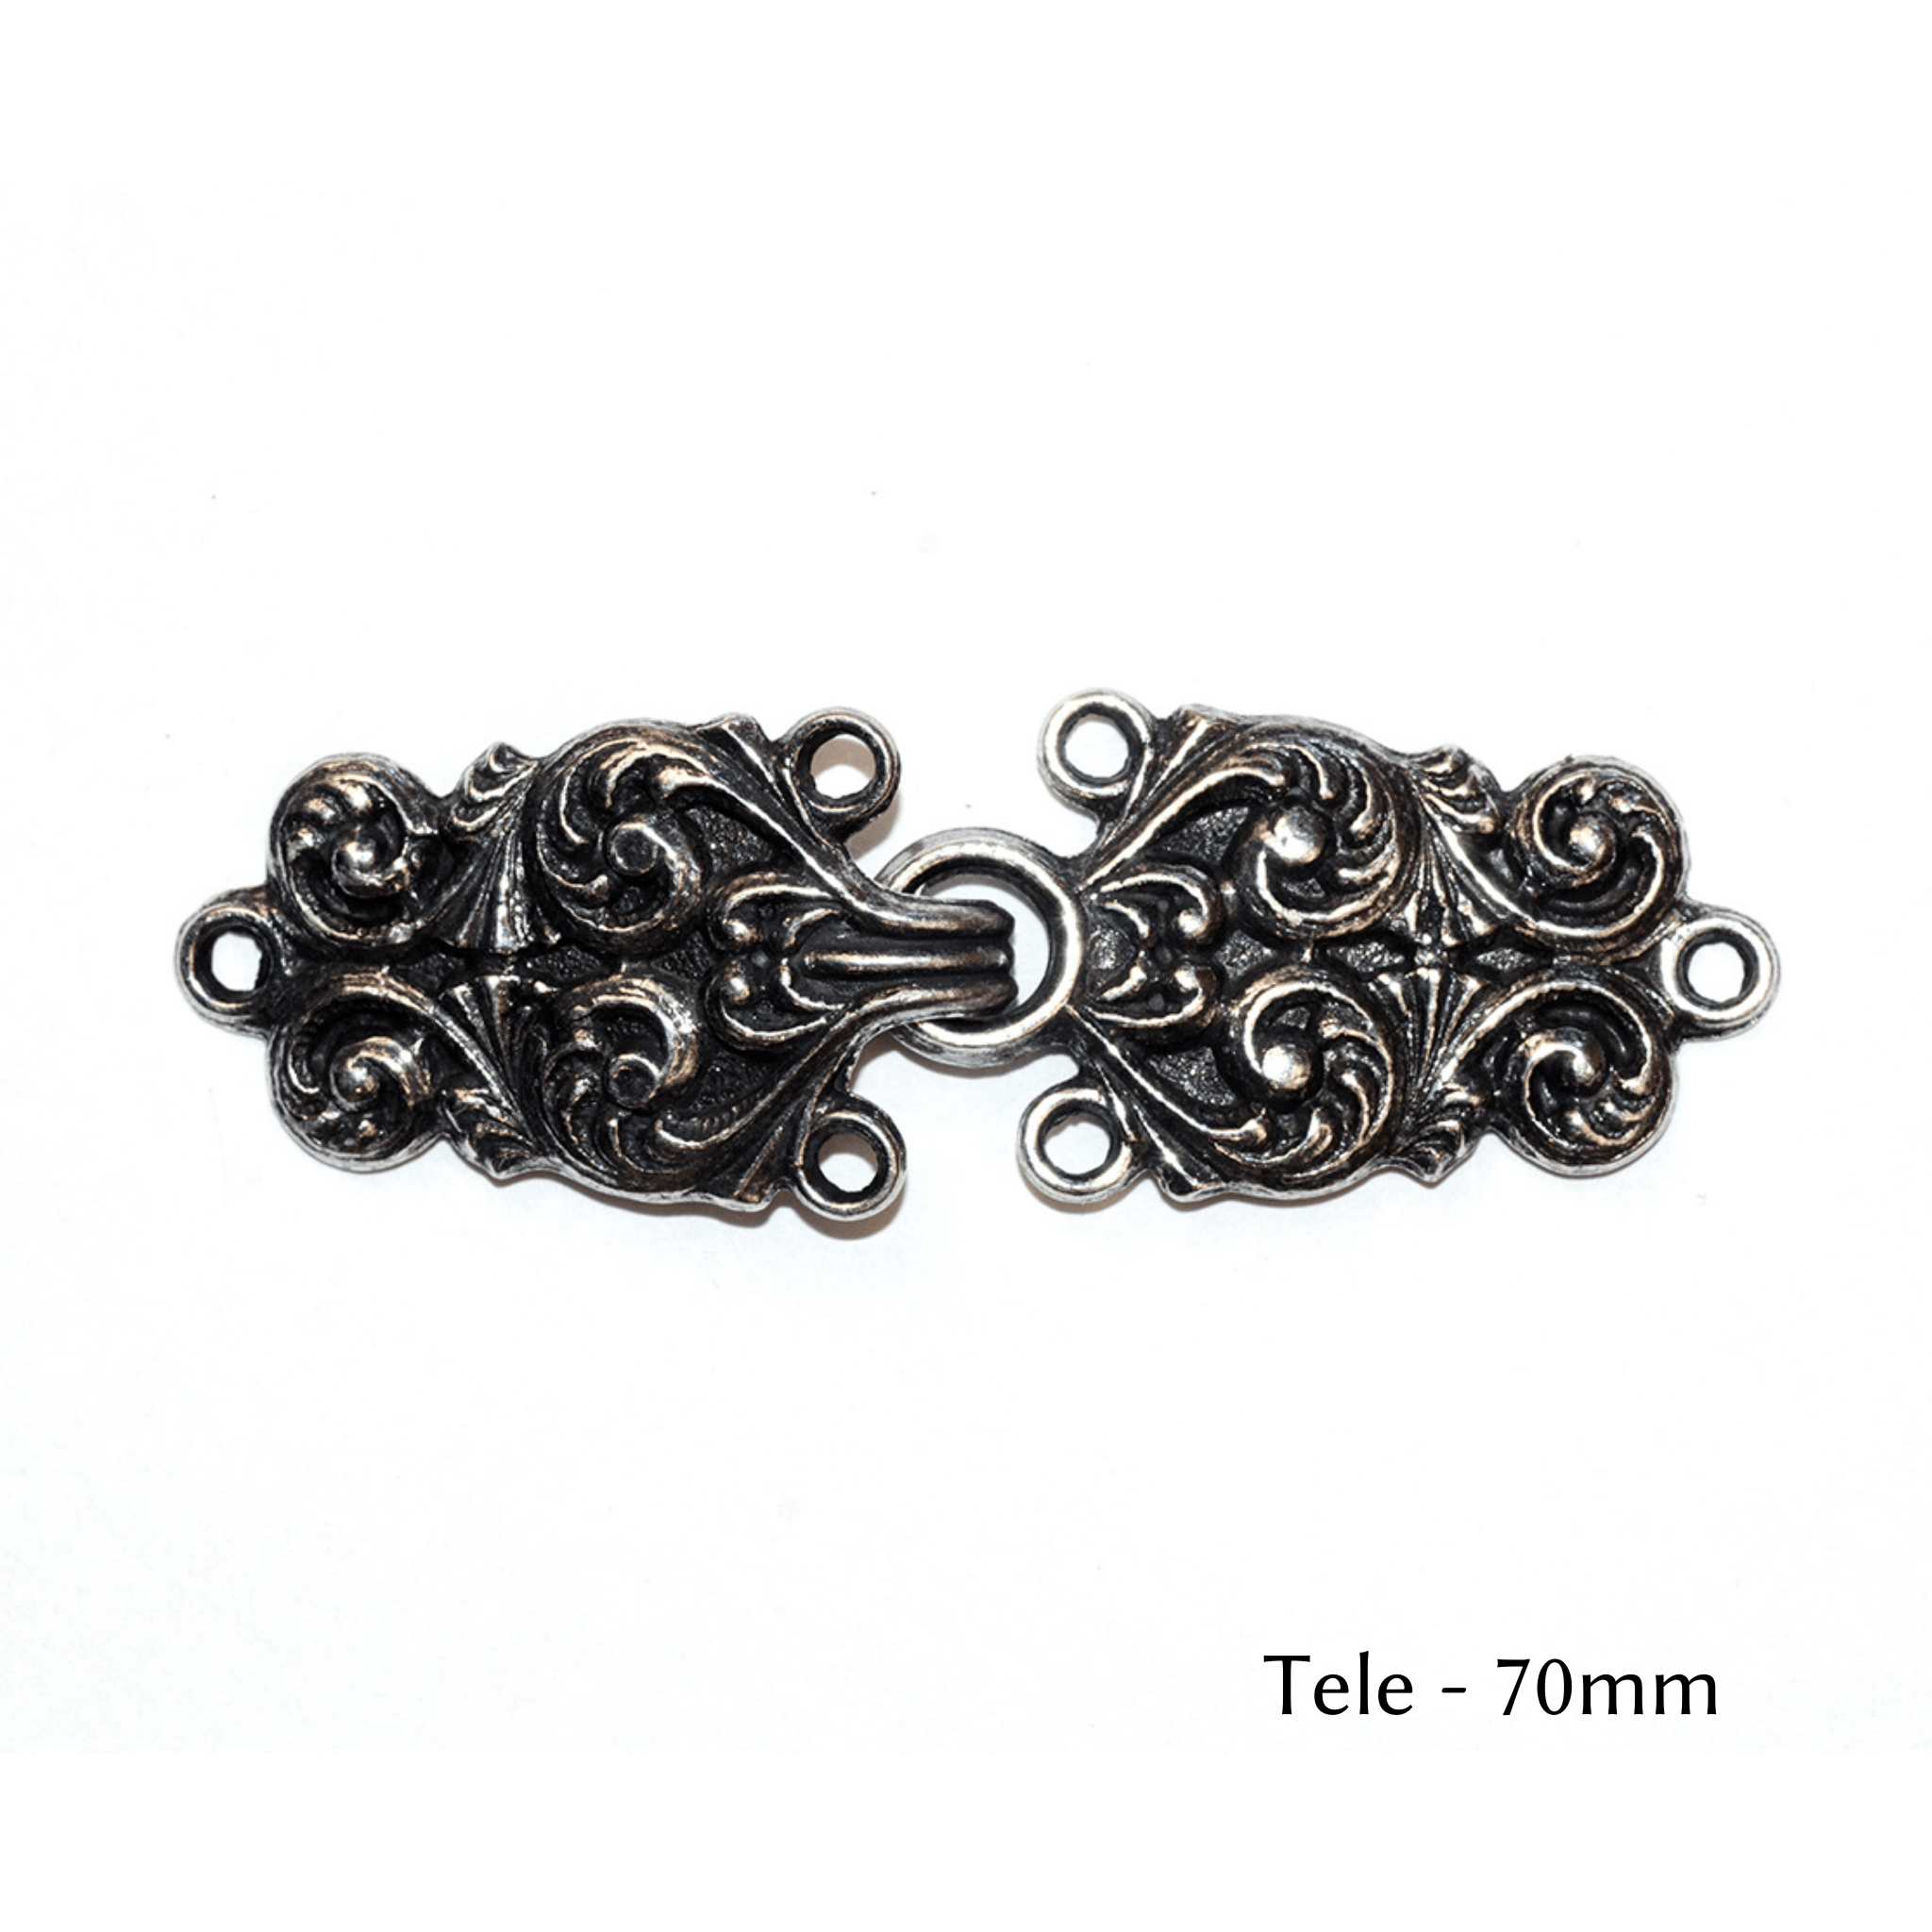 Handmade Ornate Celtic Knot Copper Cardigan Clasp or Sweater Clasp for Knit  and Fabric Metal Clasp Copper Clasp Celtic Clasp CL006 